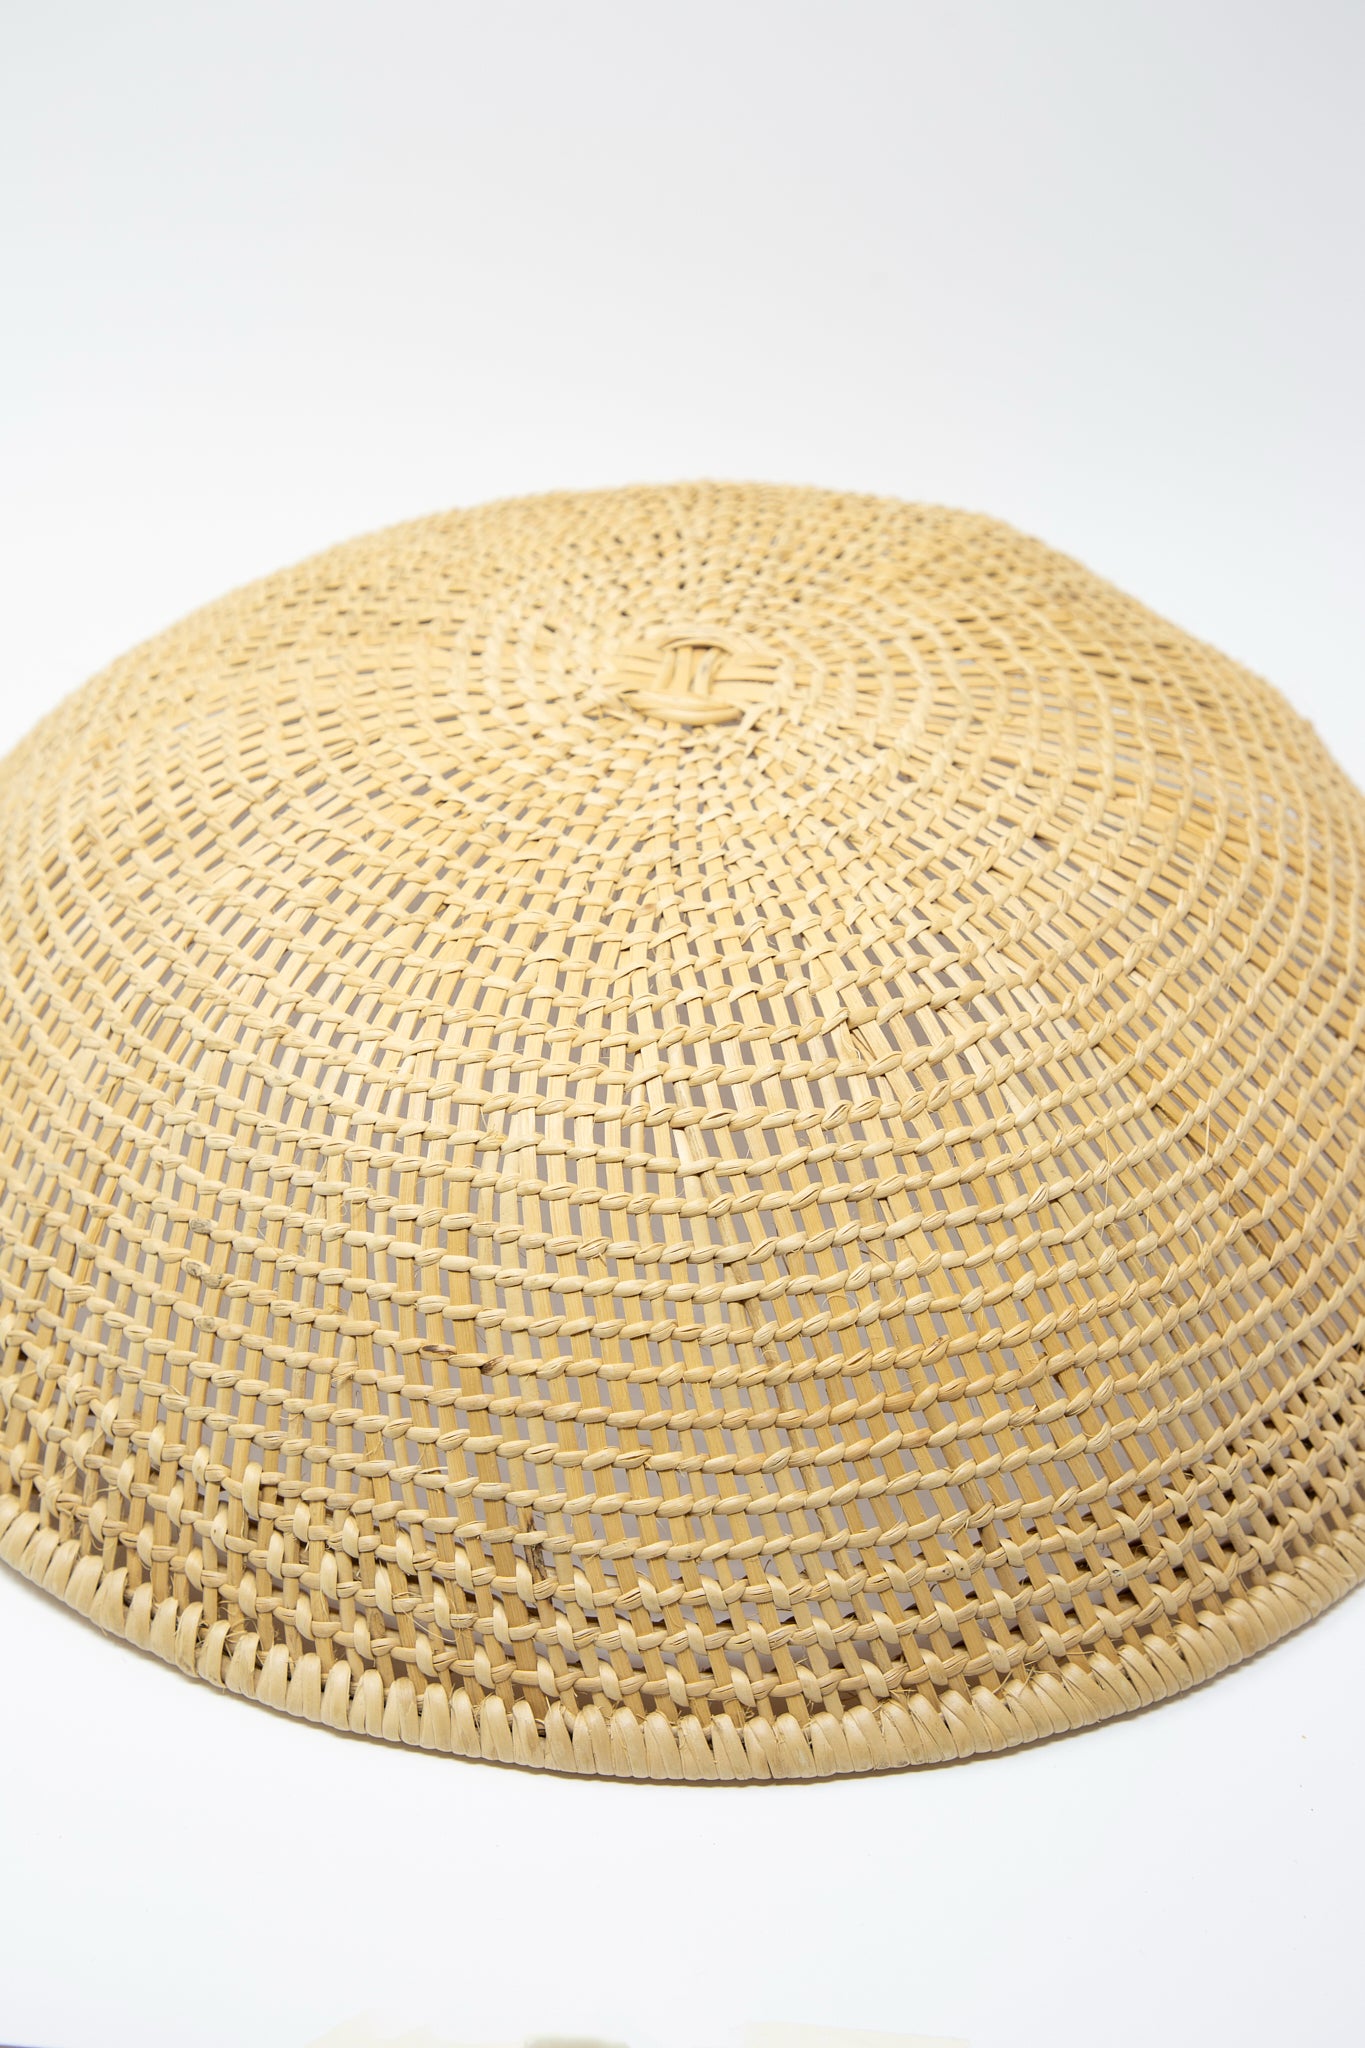 An XL Avia Pova Basket, skillfully woven using traditional techniques, resting on a clean white surface. Upside down view and up close.